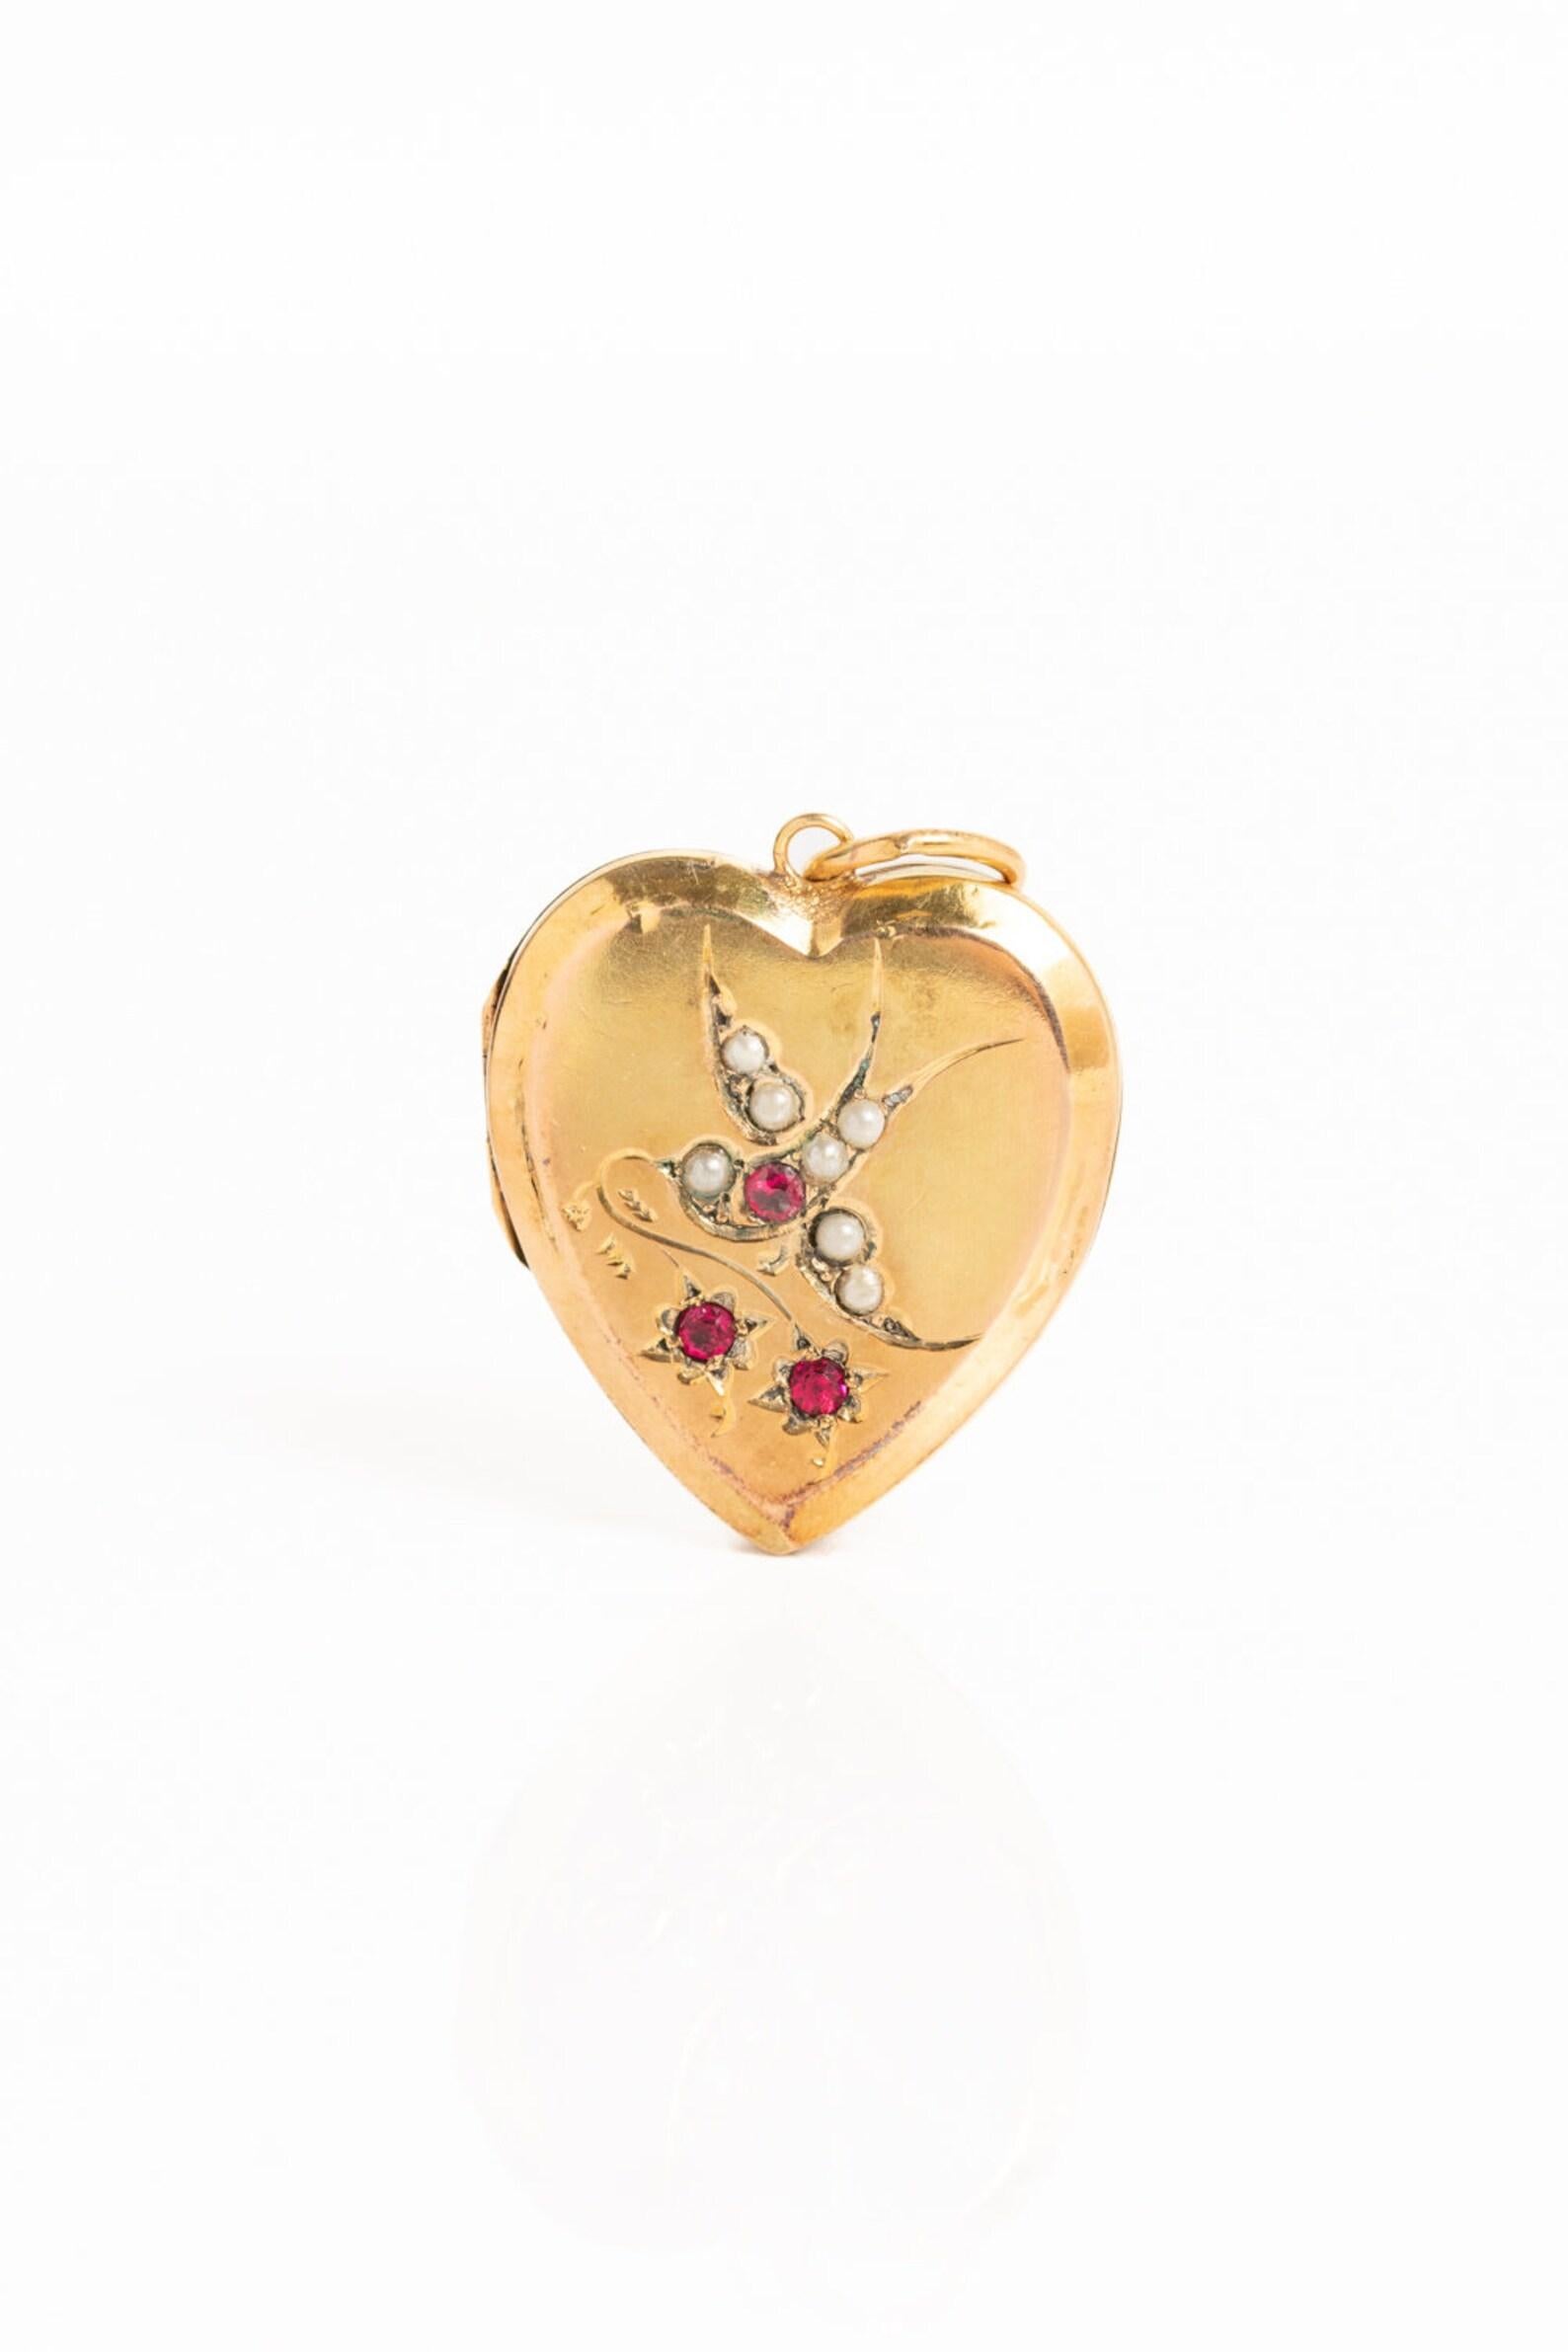 A wonderful Victorian 9ct gold back & front seed pearl and ruby heart locket with a swallow will make a lovely addition to your jewellery collection. The locket opens to reveal two compartments for photographs. The front of the locket is very